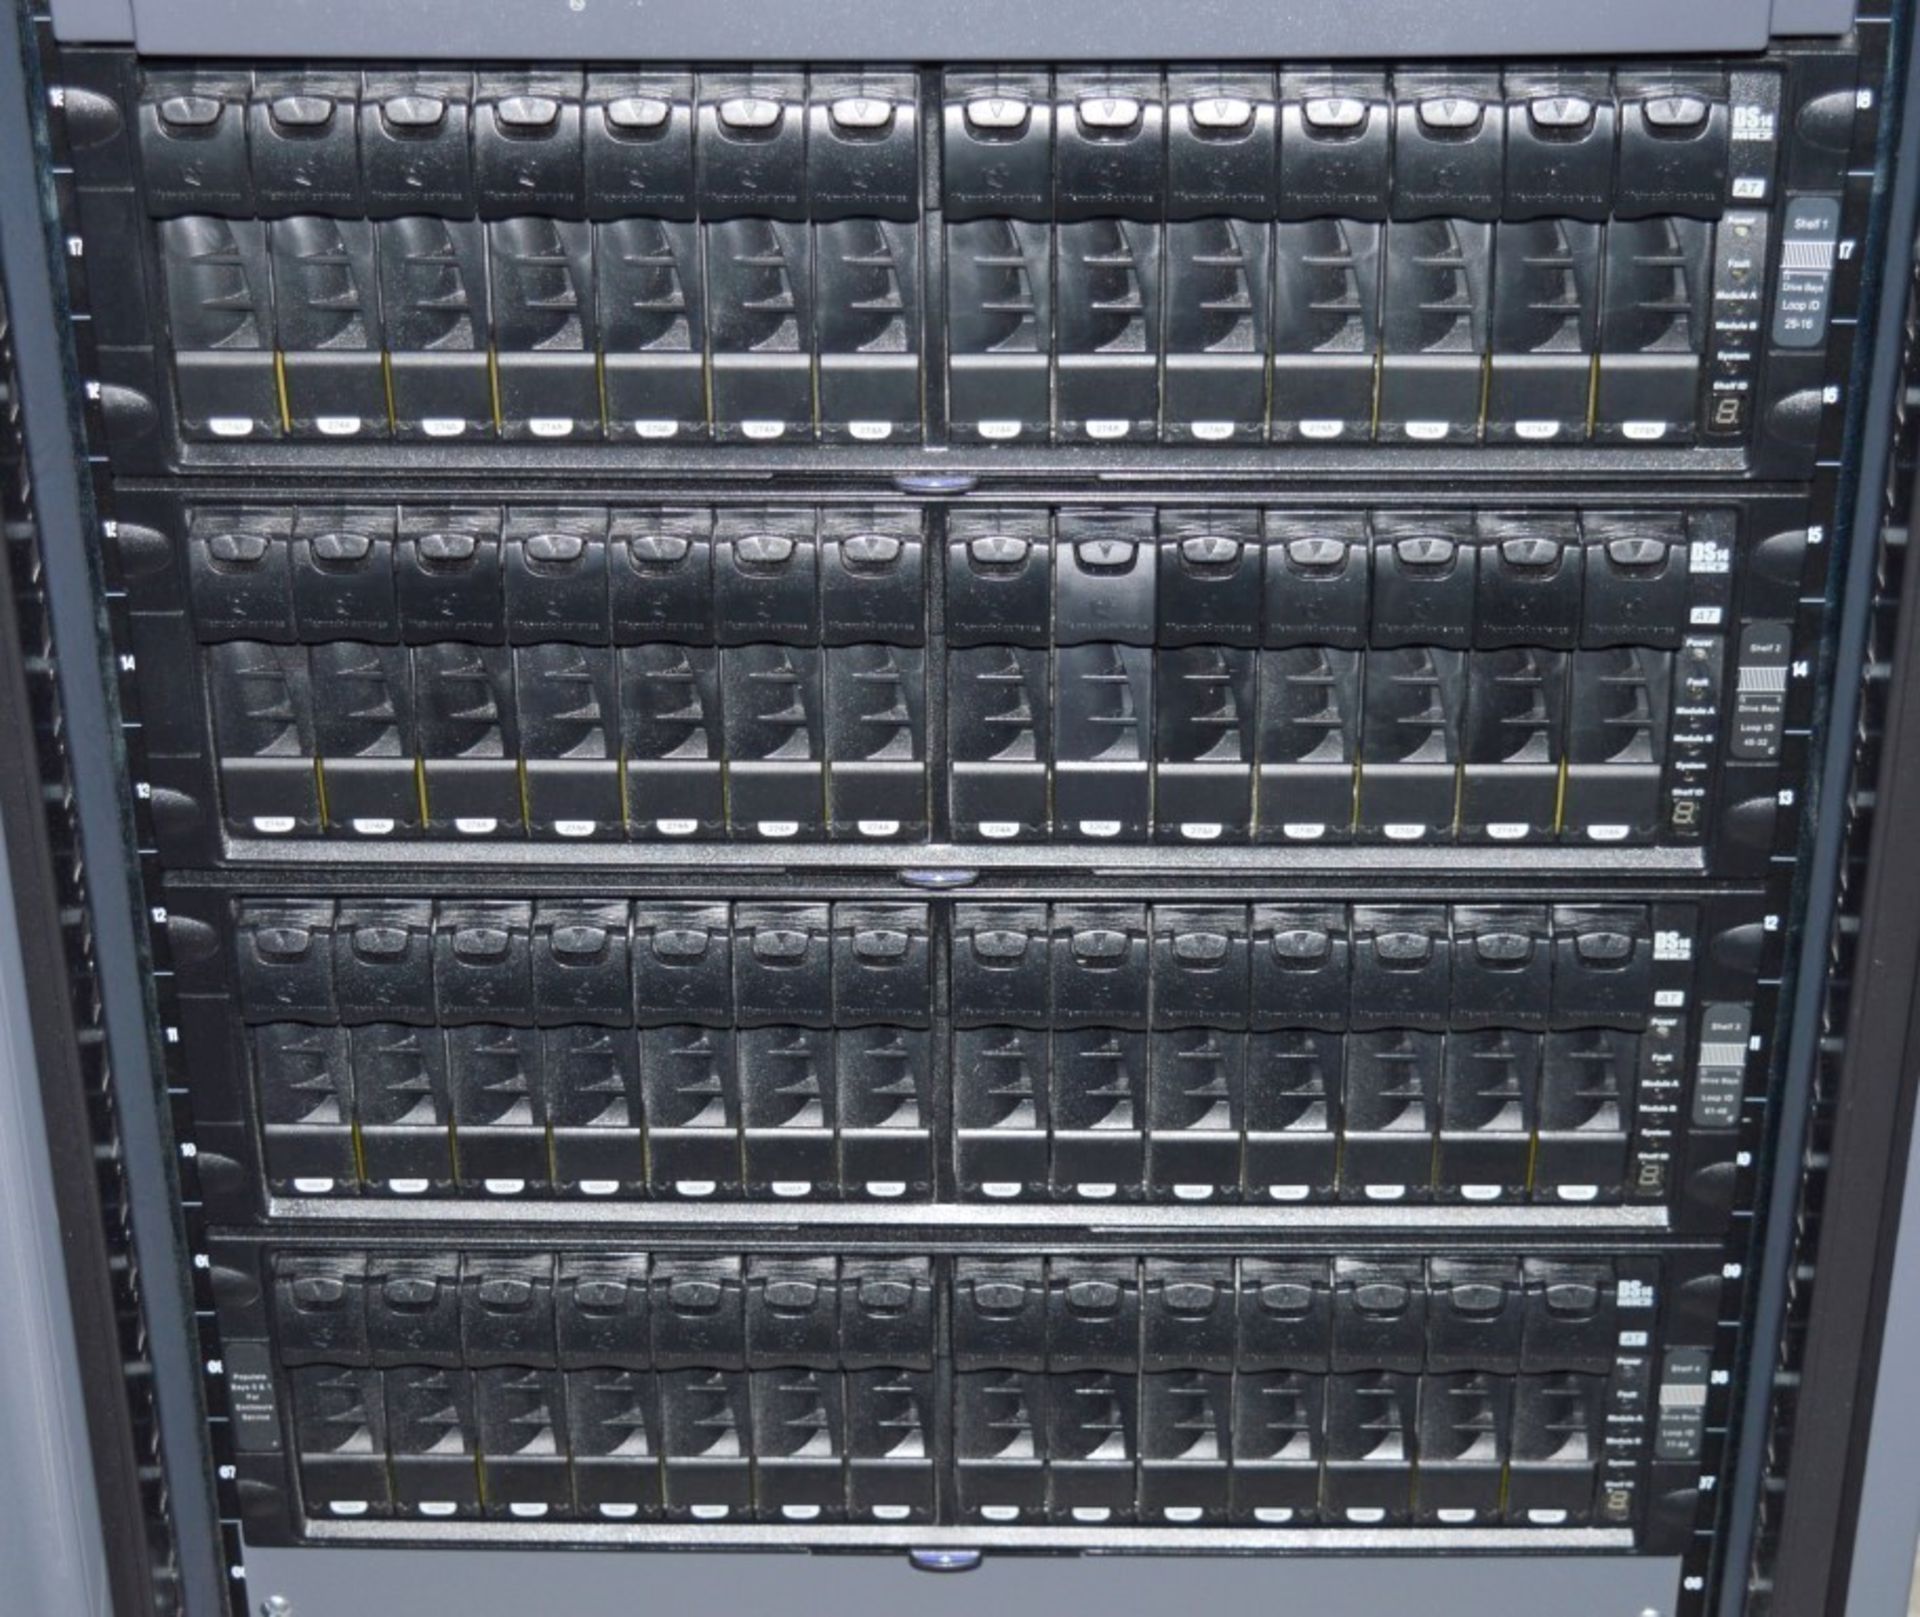 1 x Network Appliance Netapp Filer - Netapp Data Rack With 1 x FAS3140 Controller and 9 x DS14 MK2 - Image 2 of 23